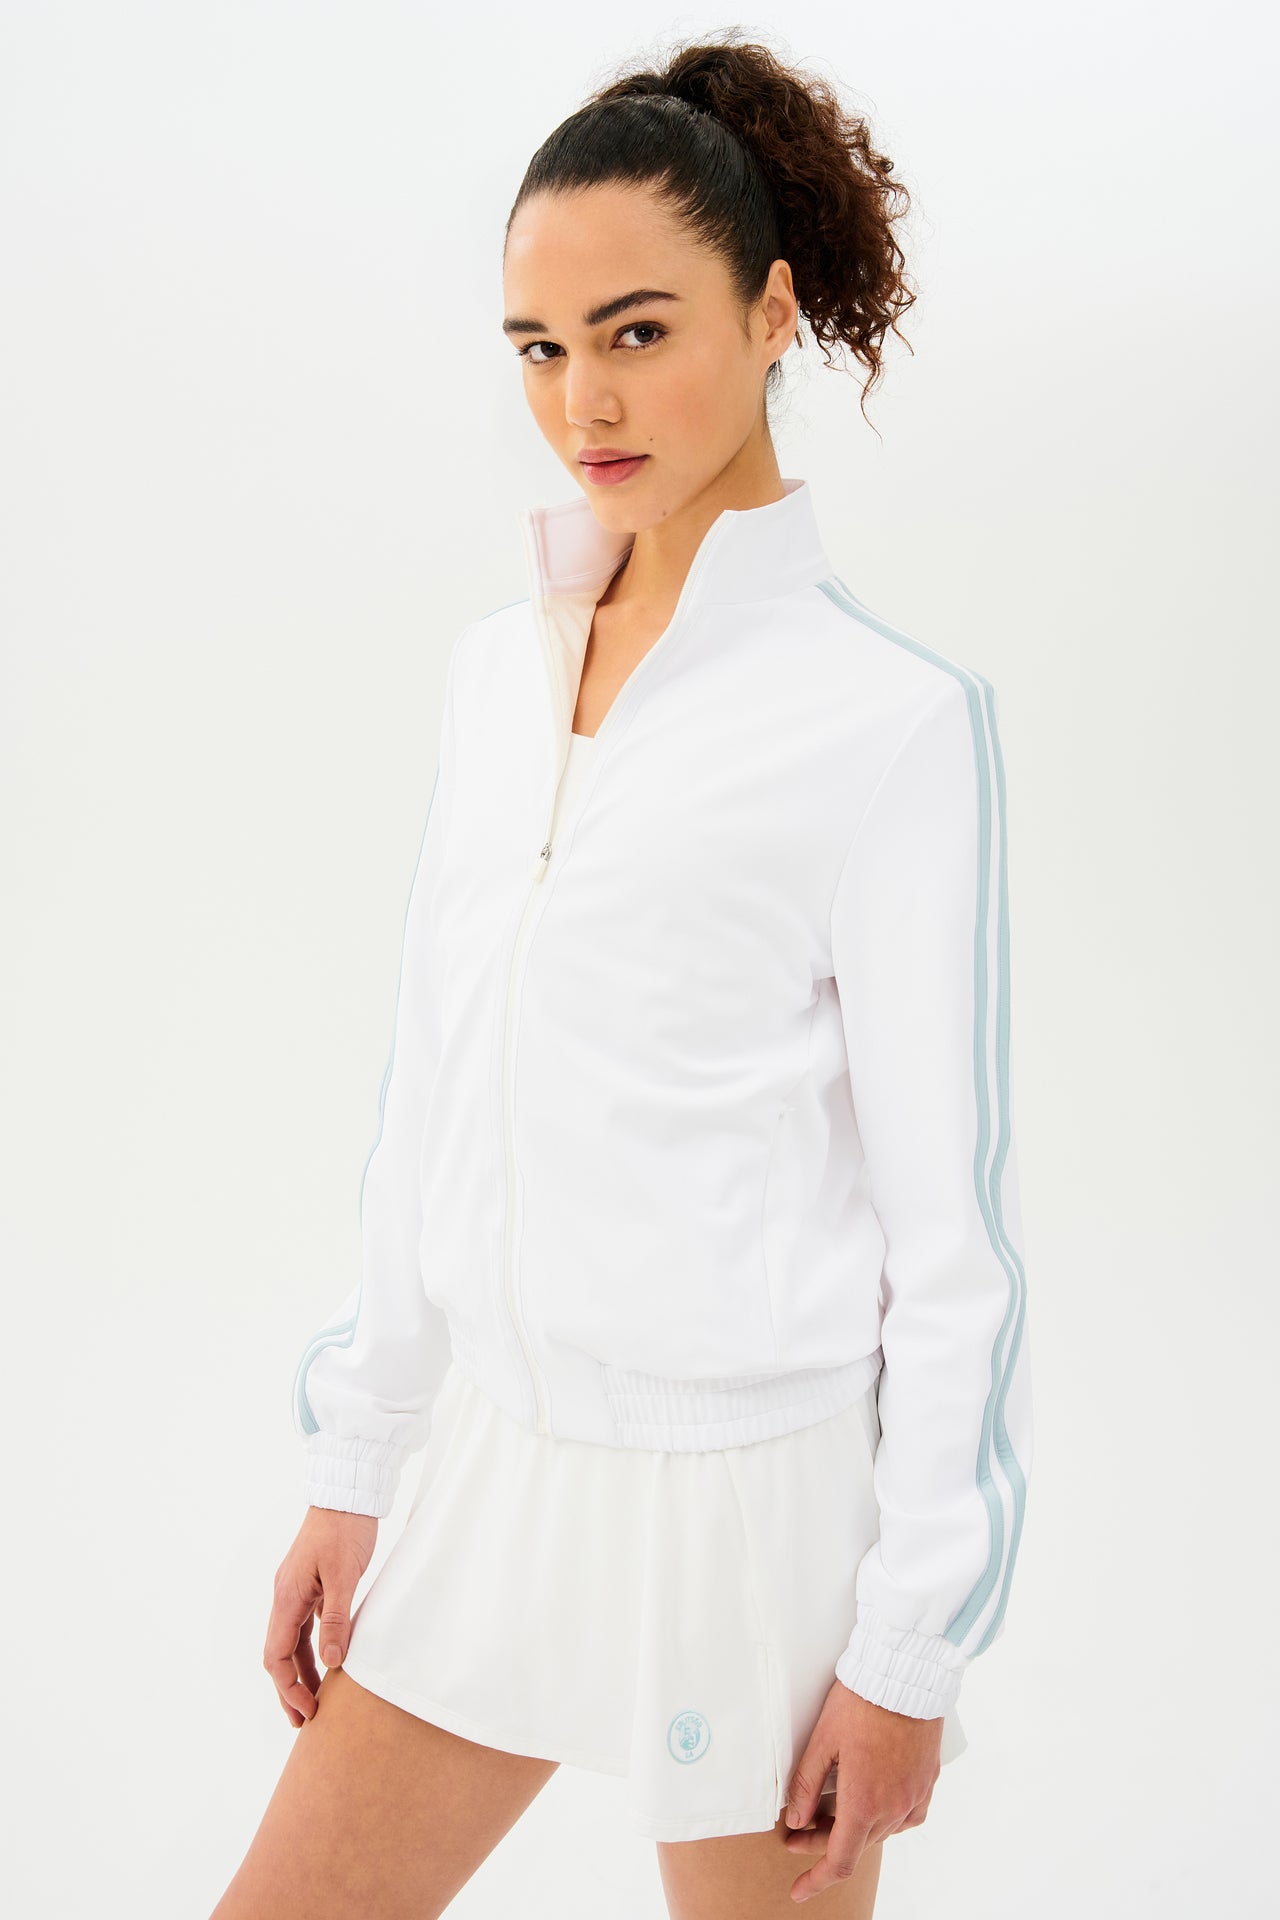 A woman wearing a SPLITS59 Fox Techflex Jacket in White/Teal for a retro vibe workout outfit.